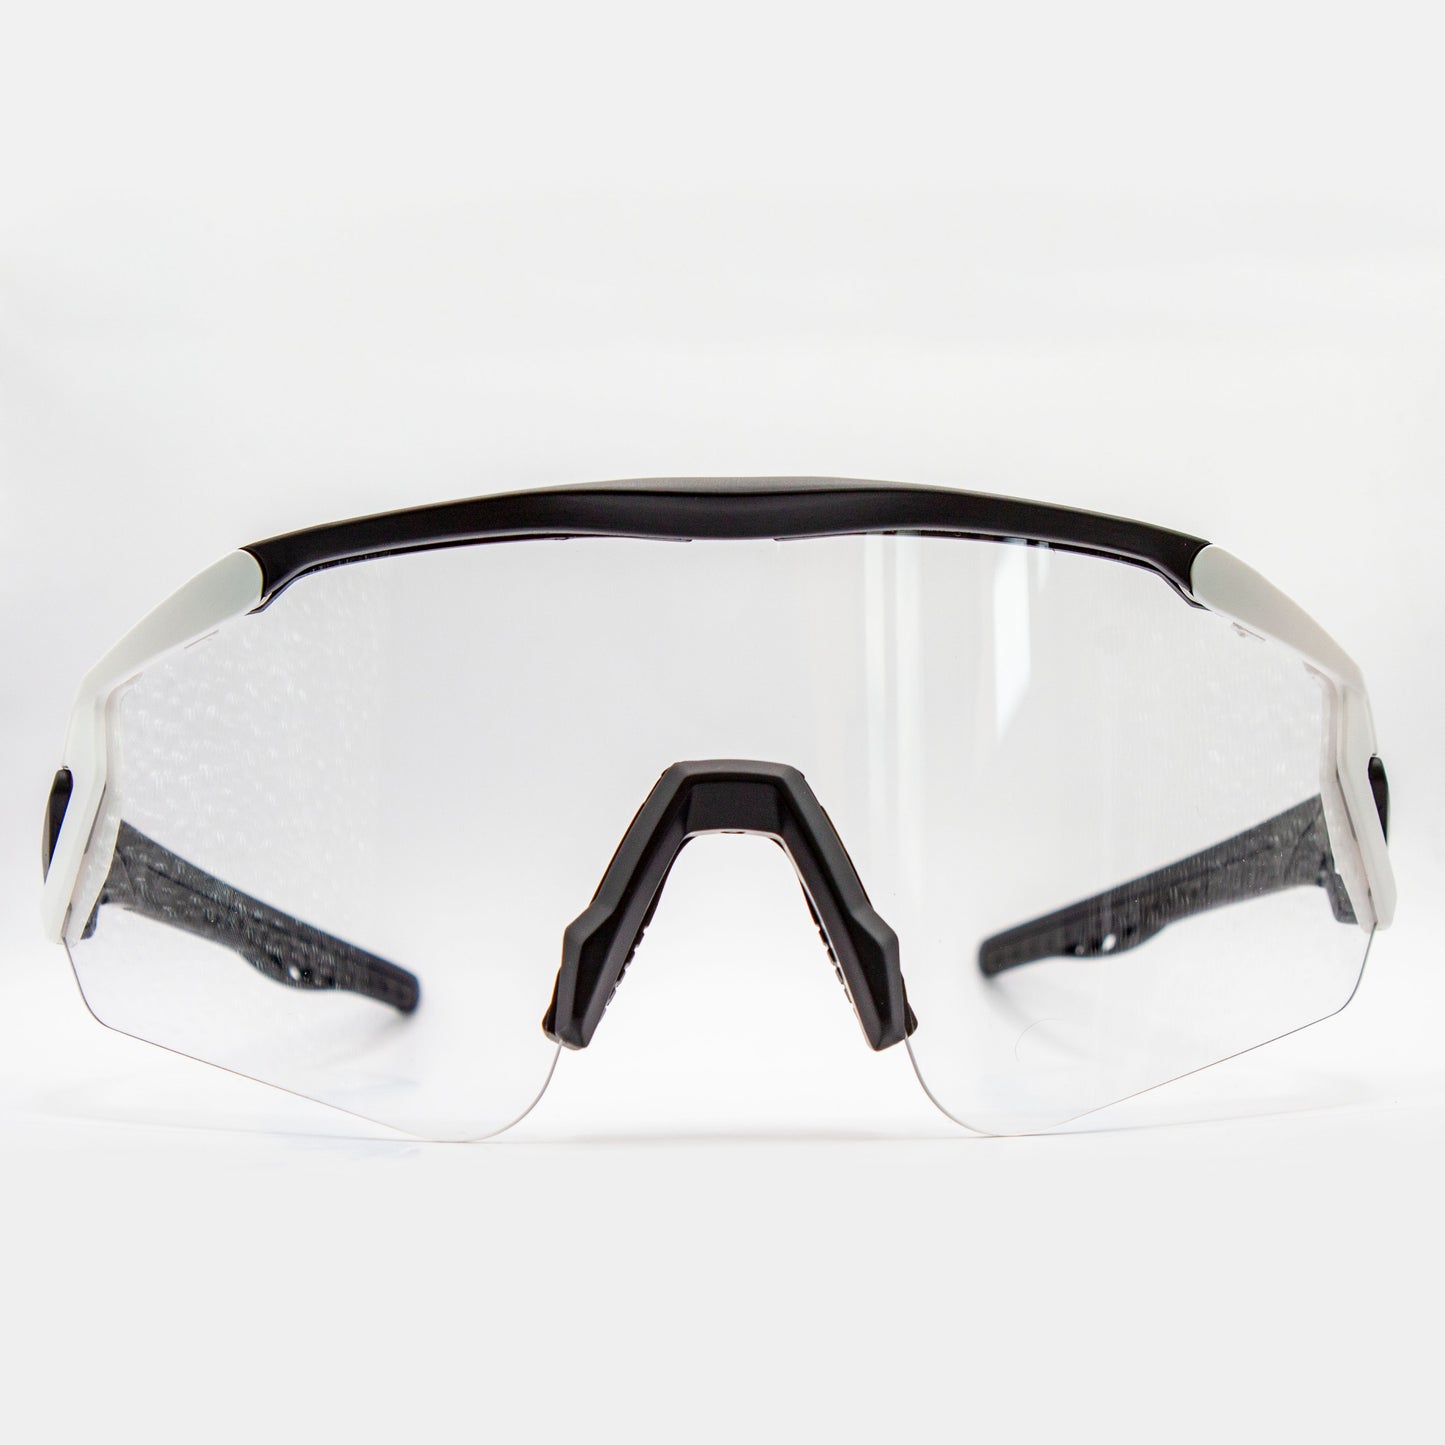 Lighwars cycling sunglasses sale - front view